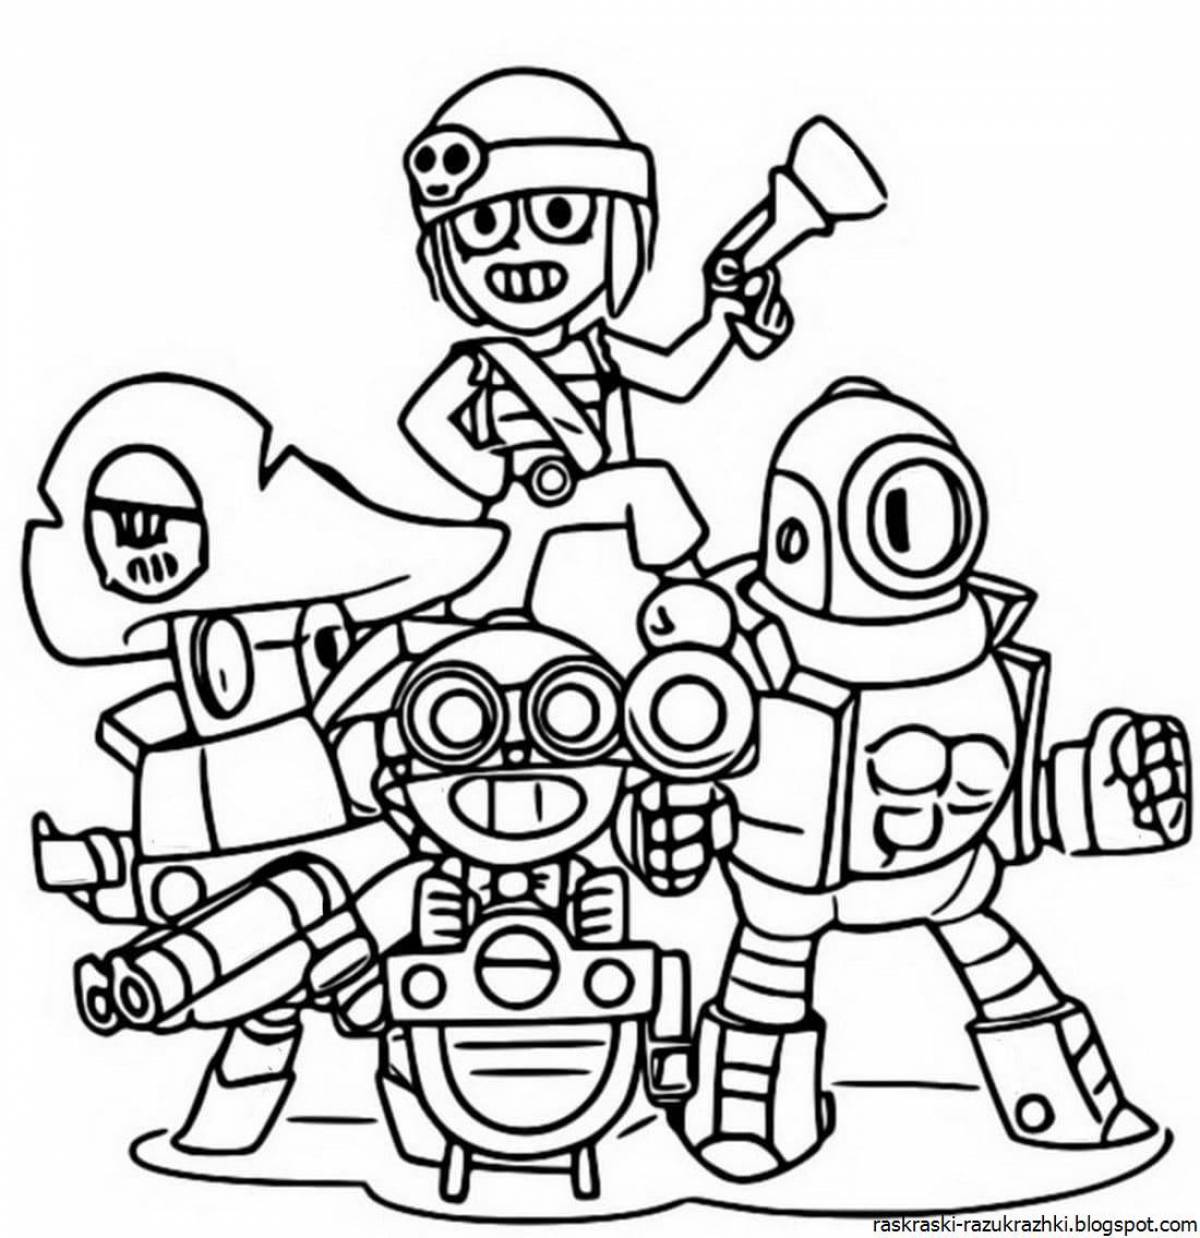 Glorious bravo stars coloring pages for boys